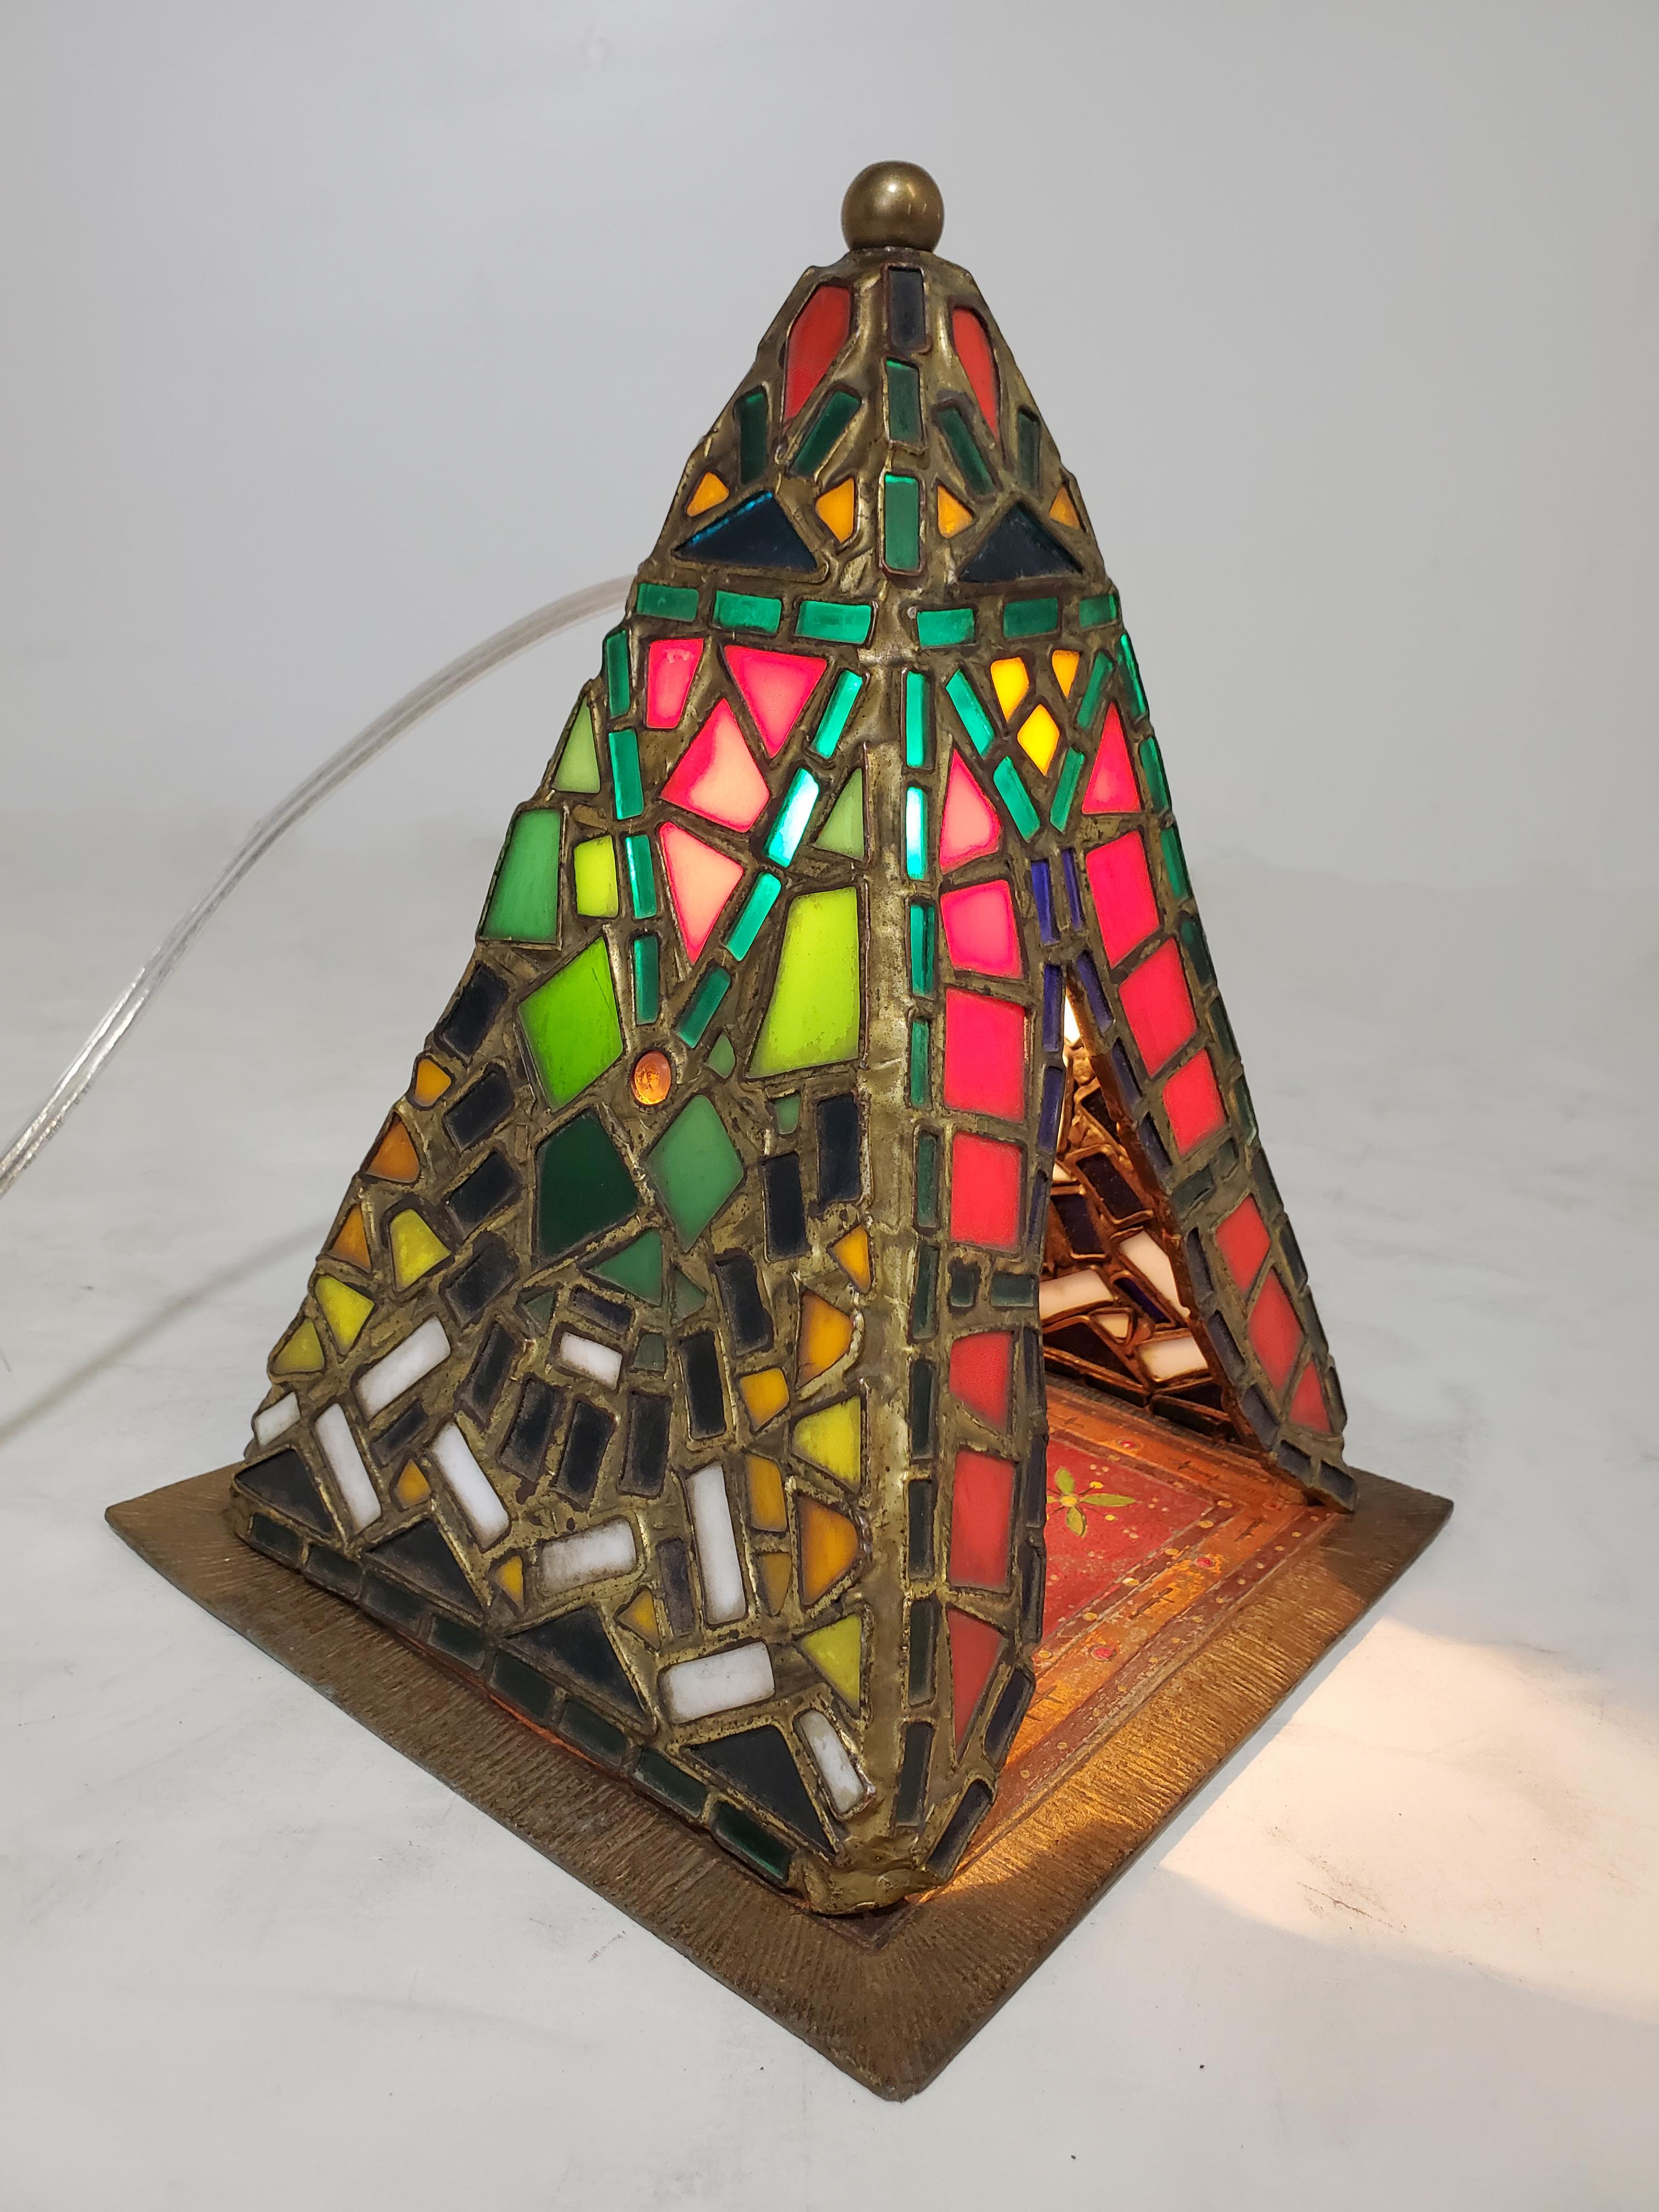 A charming Middle Eastern theme decorative table lamp / night light in leaded glass and cold painted French metal. Highly atmospheric with a soft glow and deep rich colors, the mosaic like tent illuminates to display a man smoking a pipe while